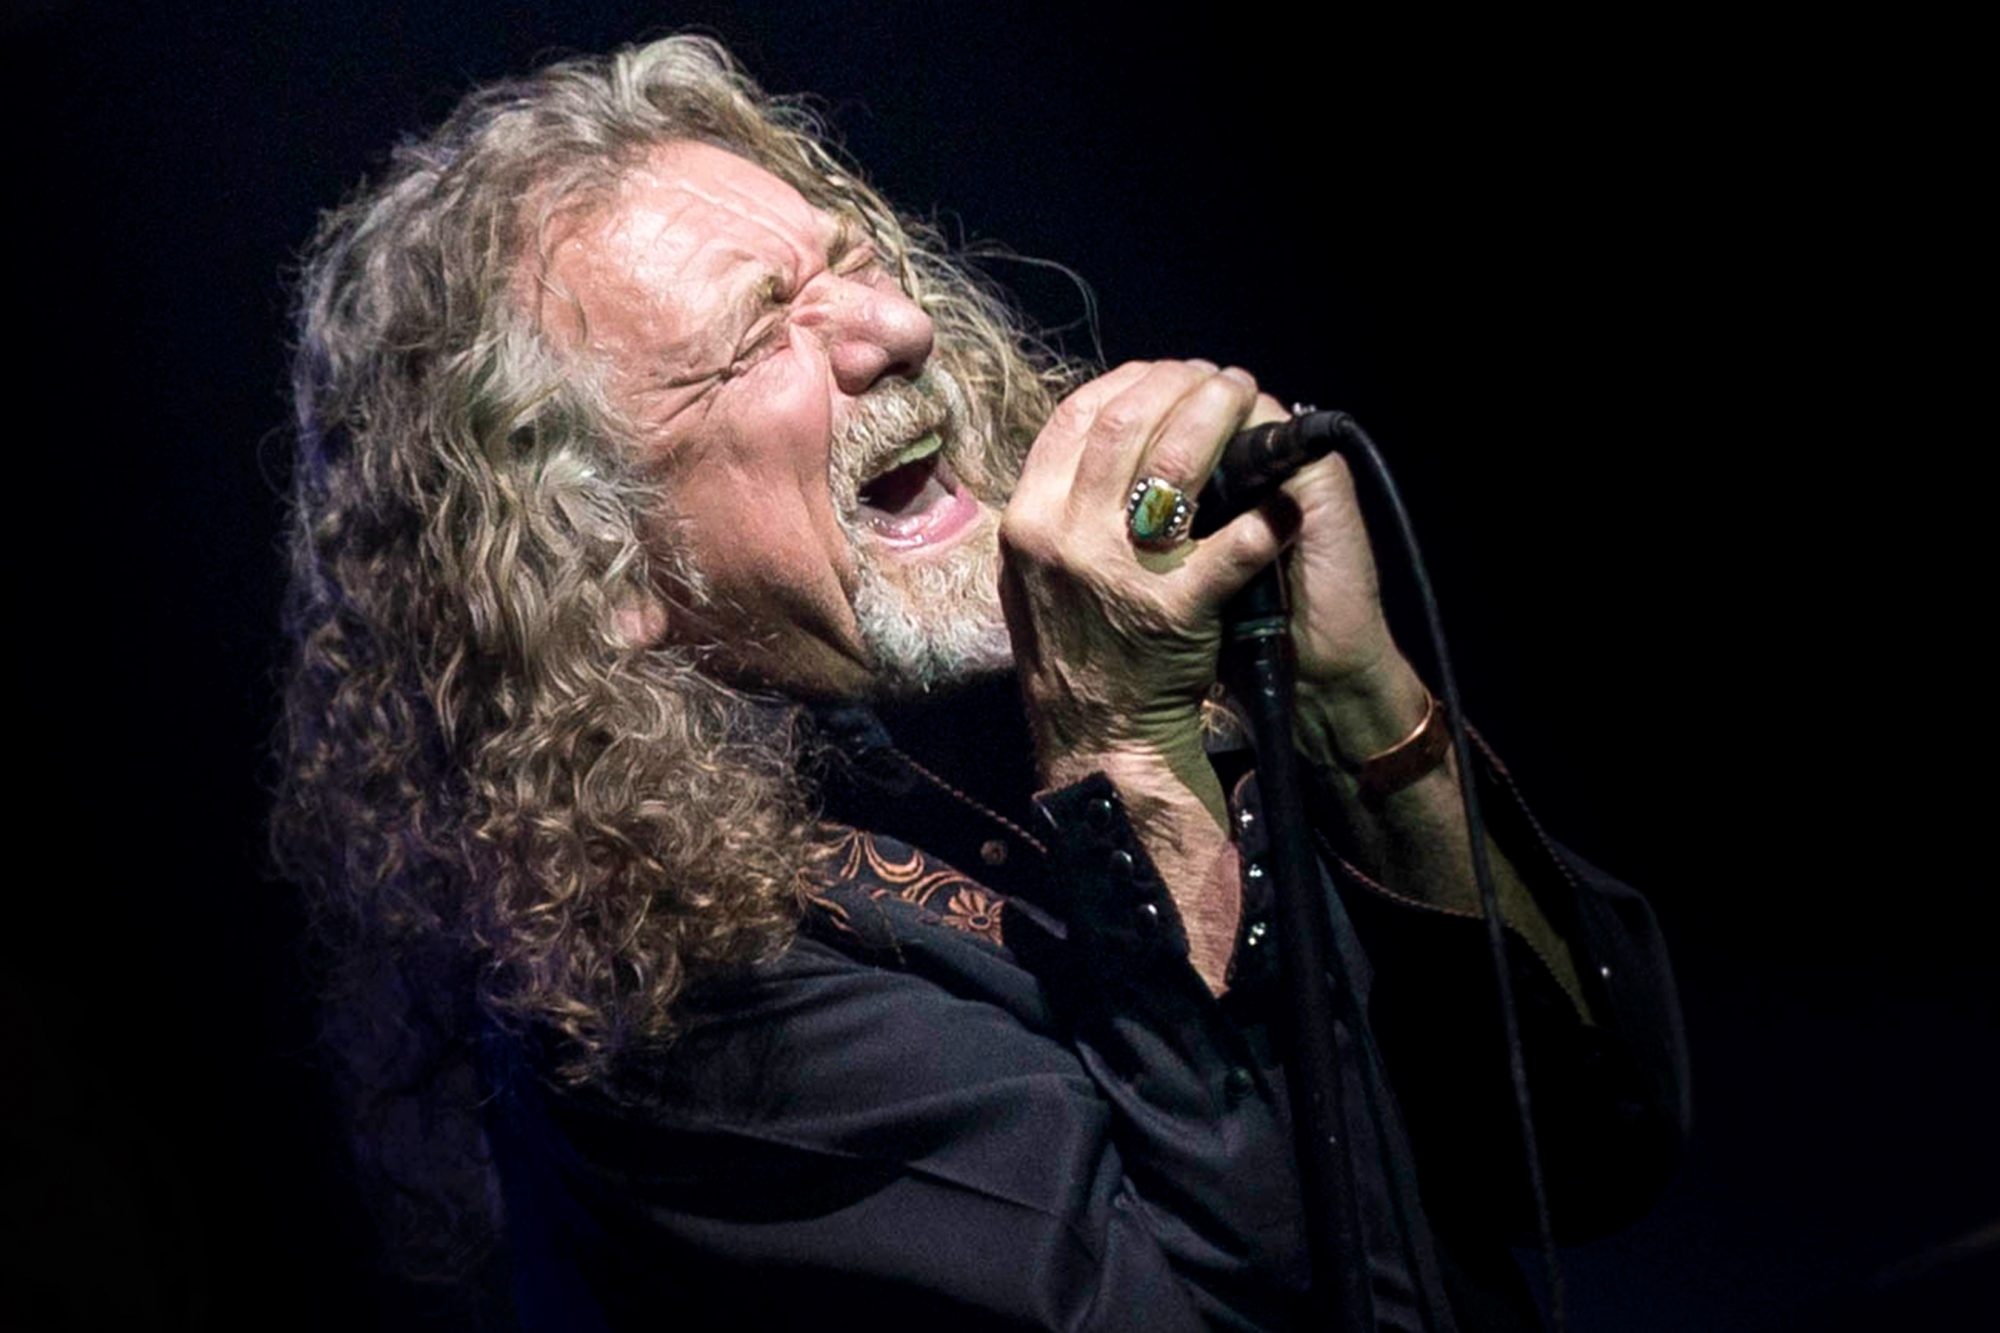 Robert Plant Carry Fire, Relevant and thought-provoking, Plant's lyrical depth, Musical reflection, 2000x1340 HD Desktop